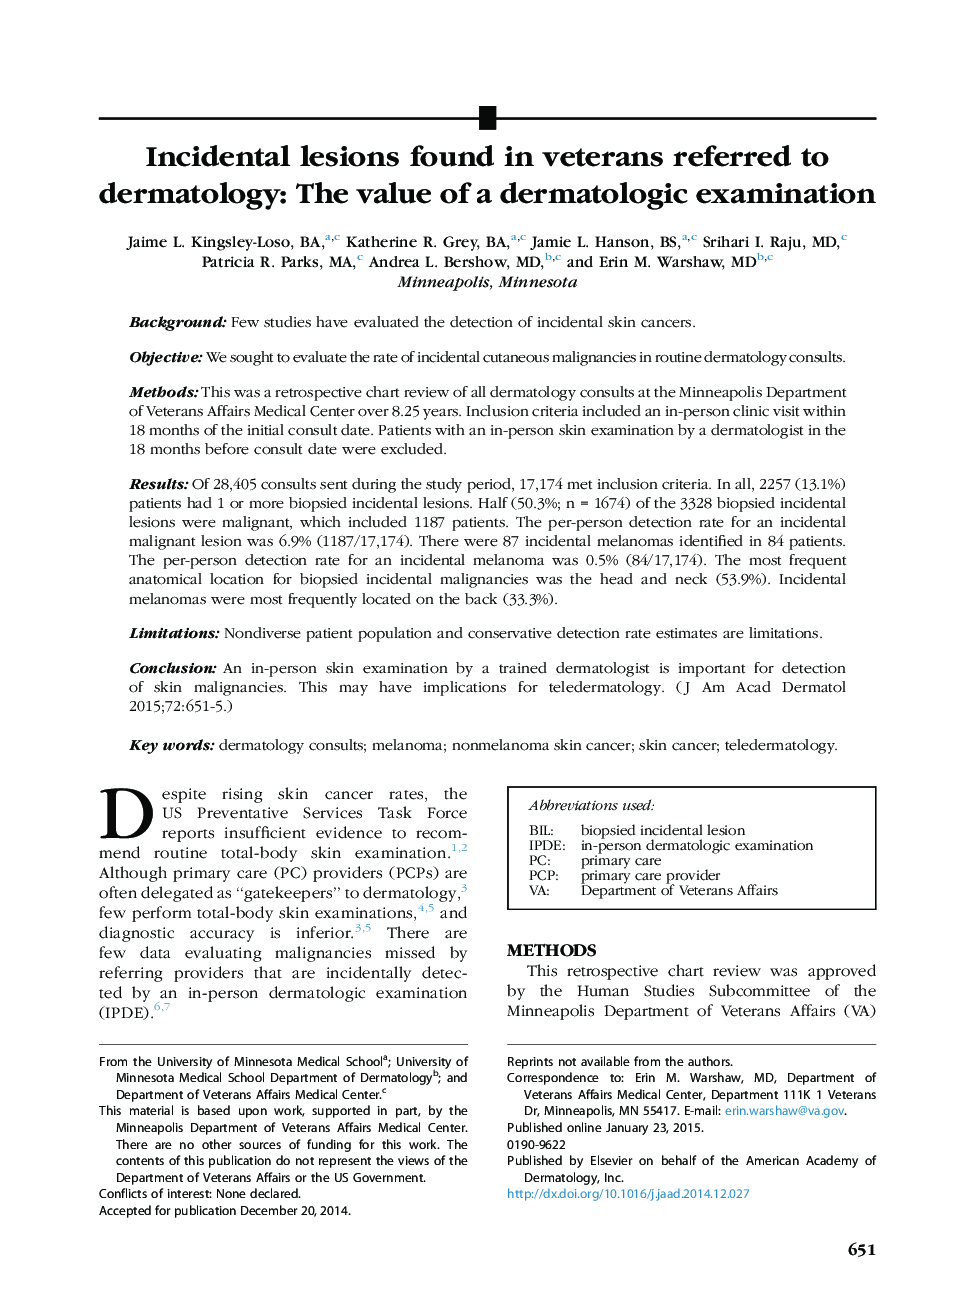 Incidental lesions found in veterans referred to dermatology: The value of a dermatologic examination